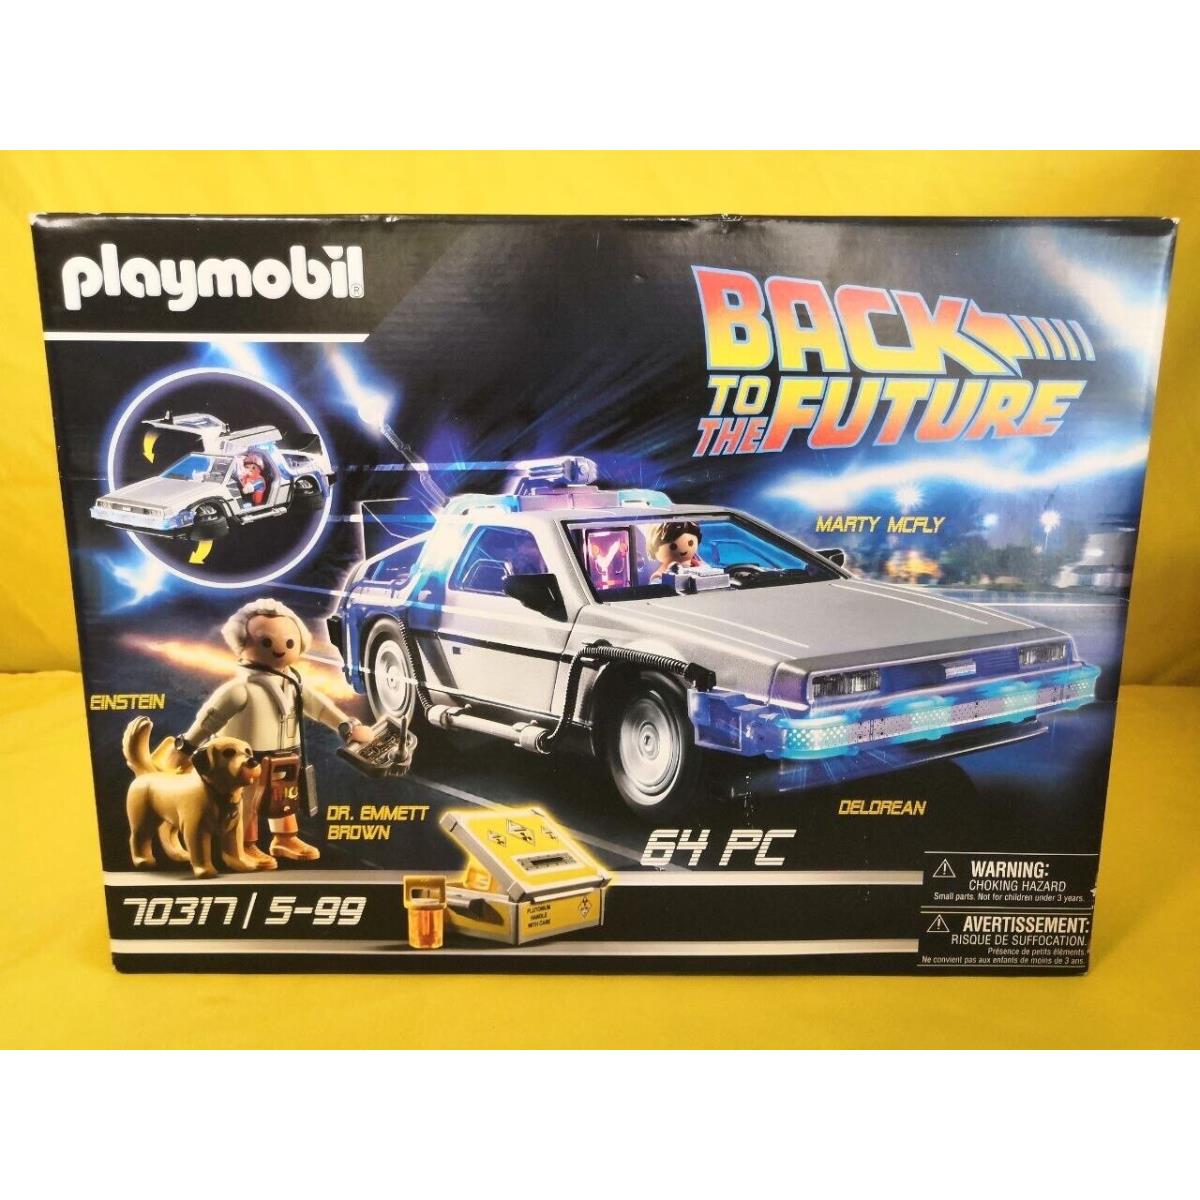 Back TO The Future Playmobile 70317 Delorean Marty Mcfly Emmett Brown 64 PC M7